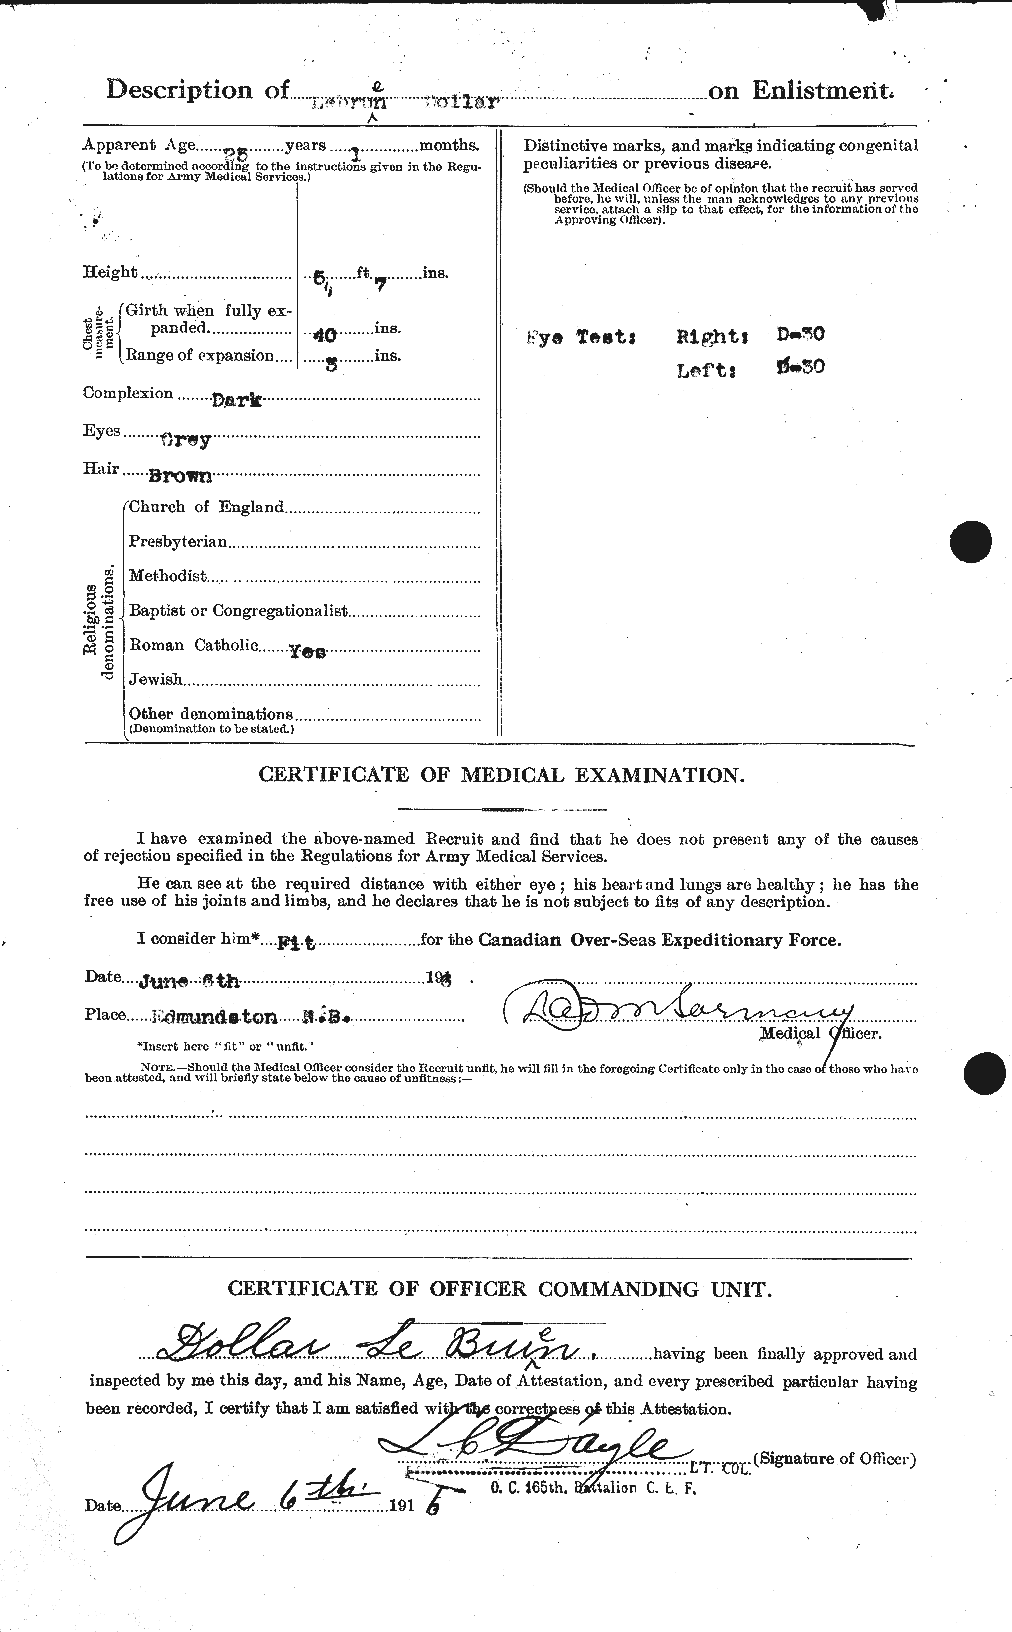 Personnel Records of the First World War - CEF 461541b